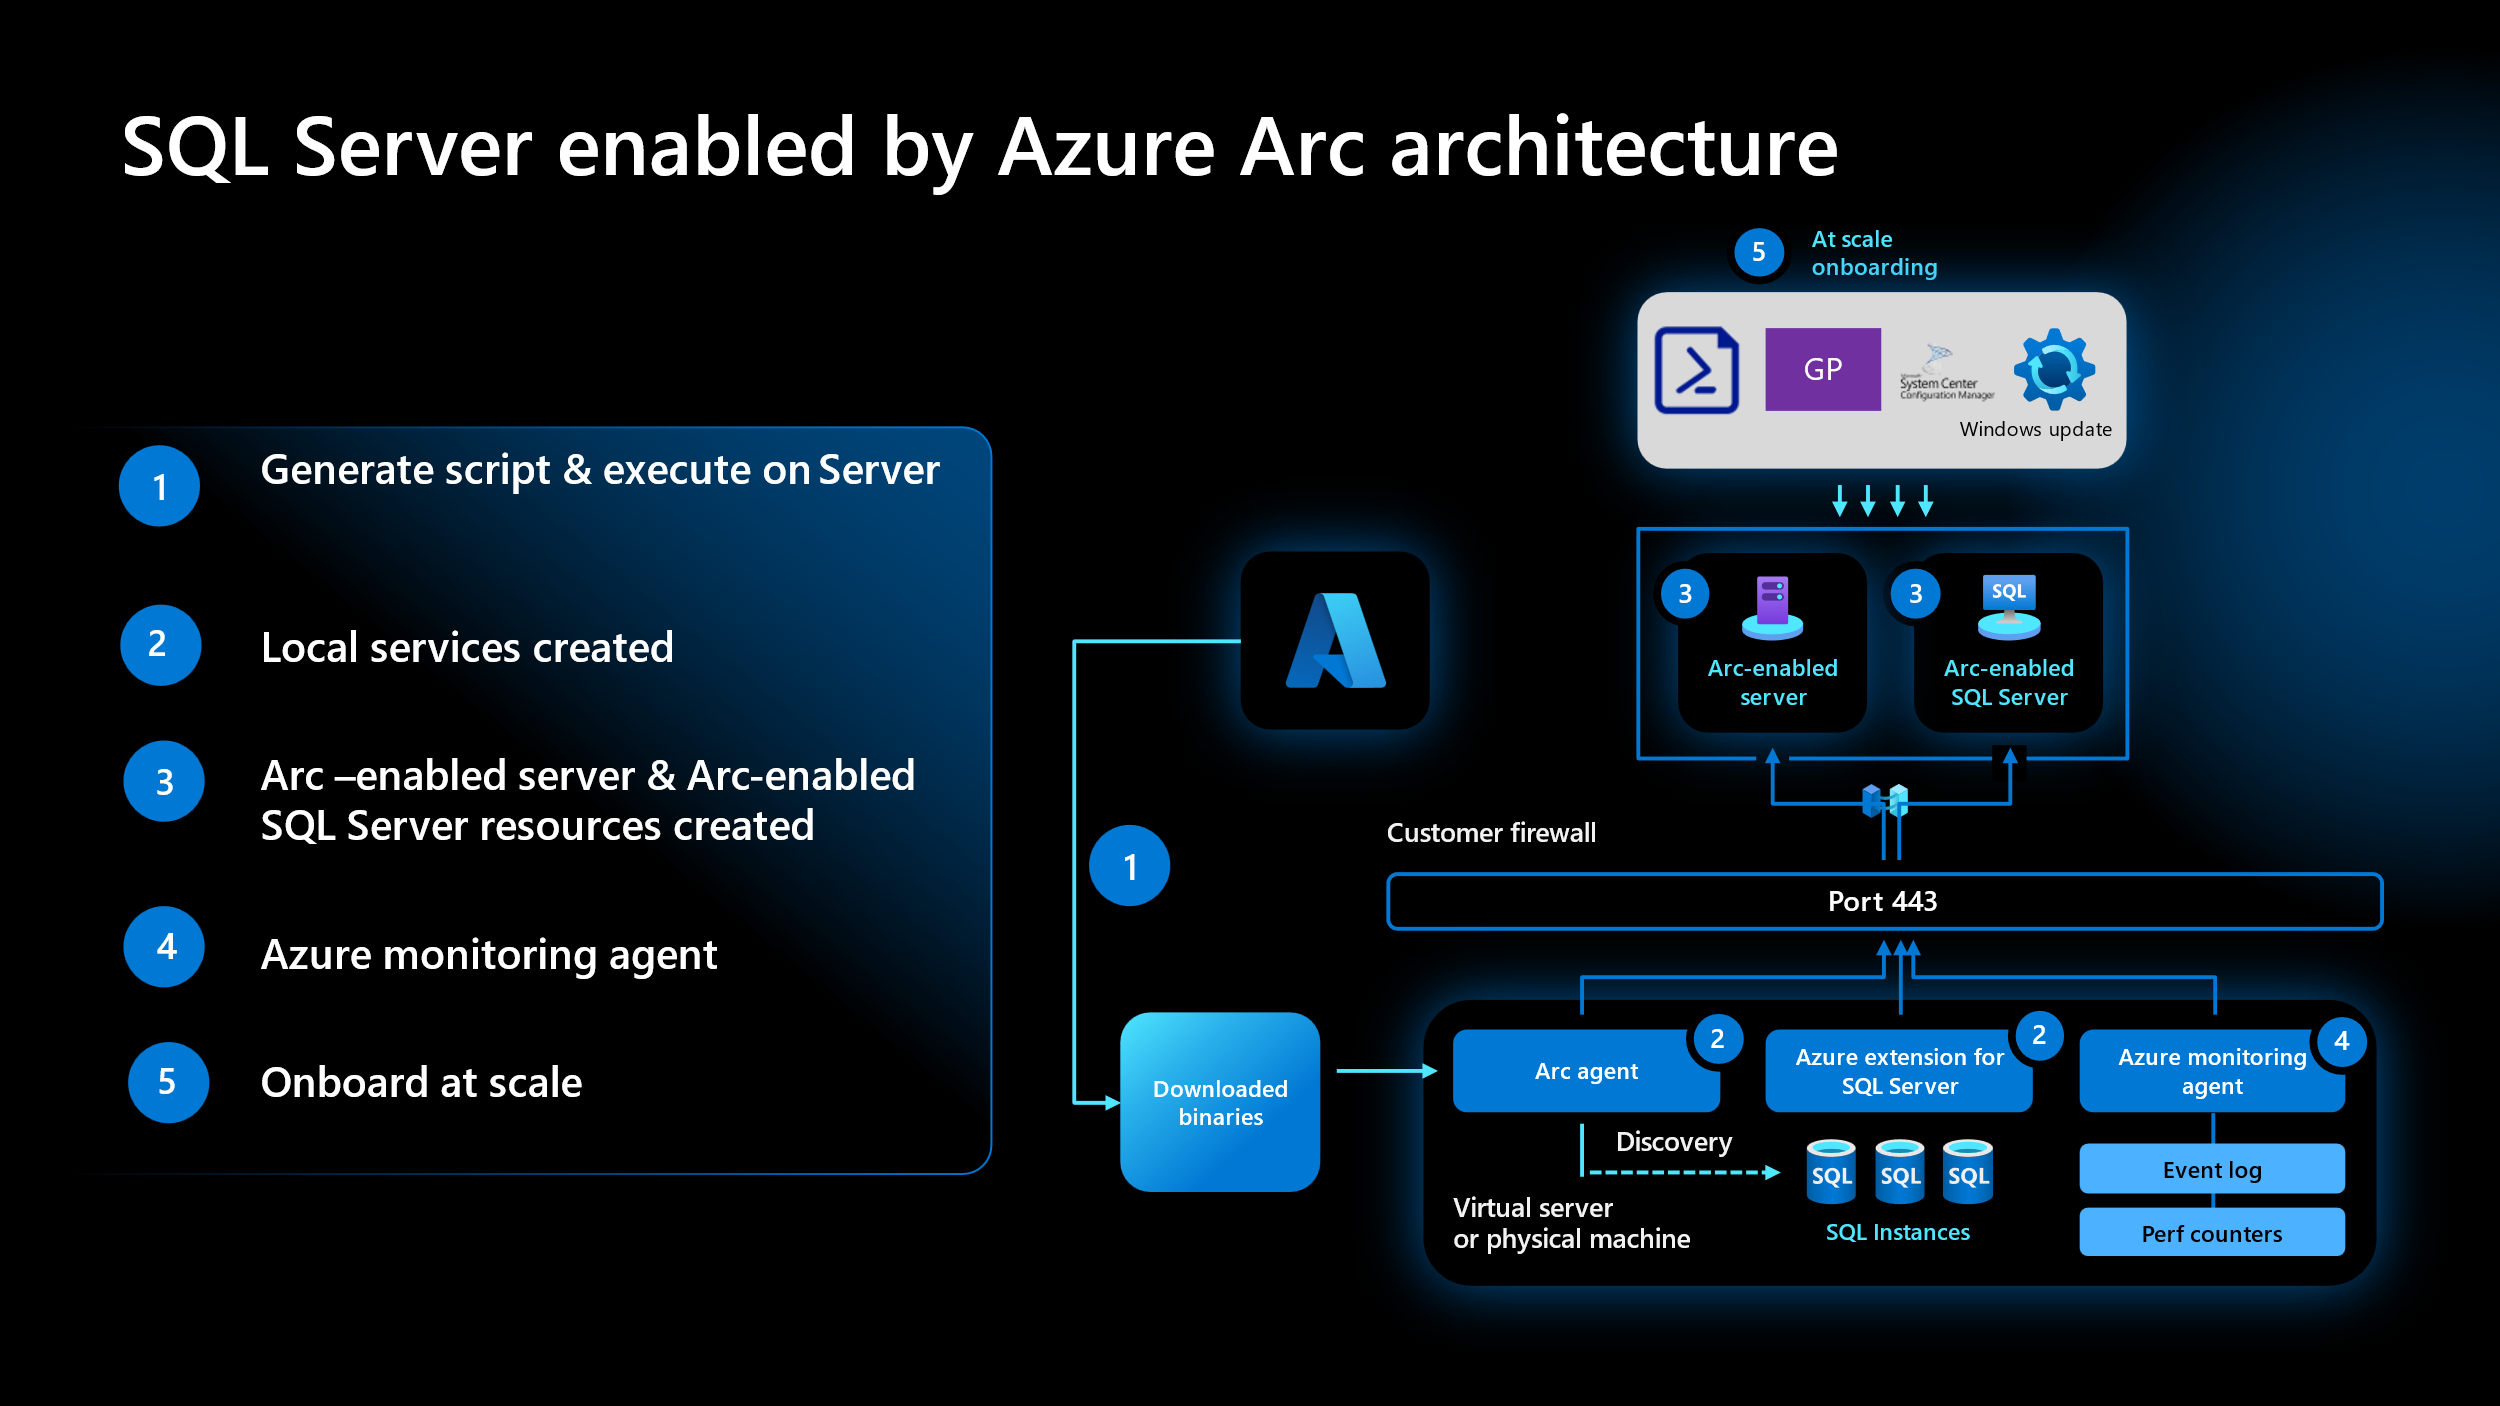 Diagram showing customer infrastructure hosts virtualization and persistent storage. Use the Azure portal or the appropriate CLI to manage the SQL Server instance.